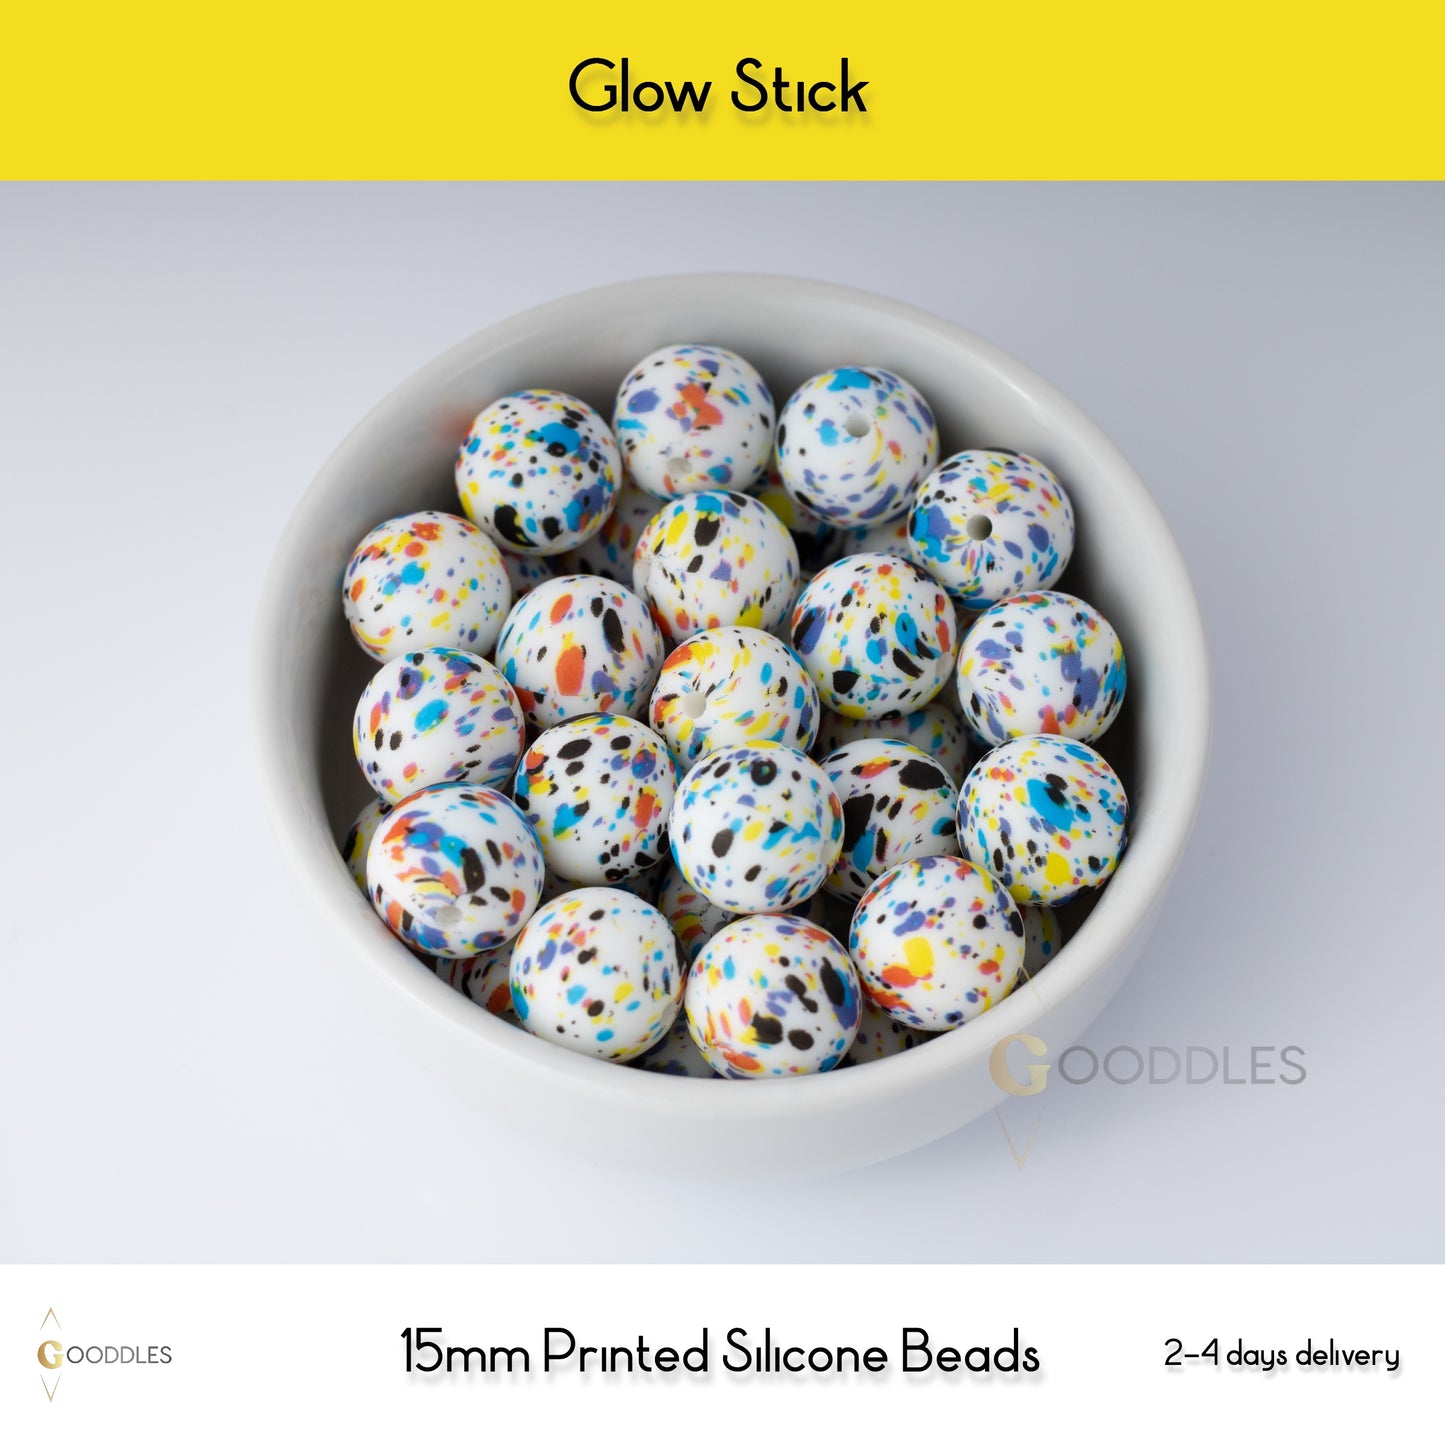 5pcs, Glow Stick Silicone Beads Printed Round Silicone Beads